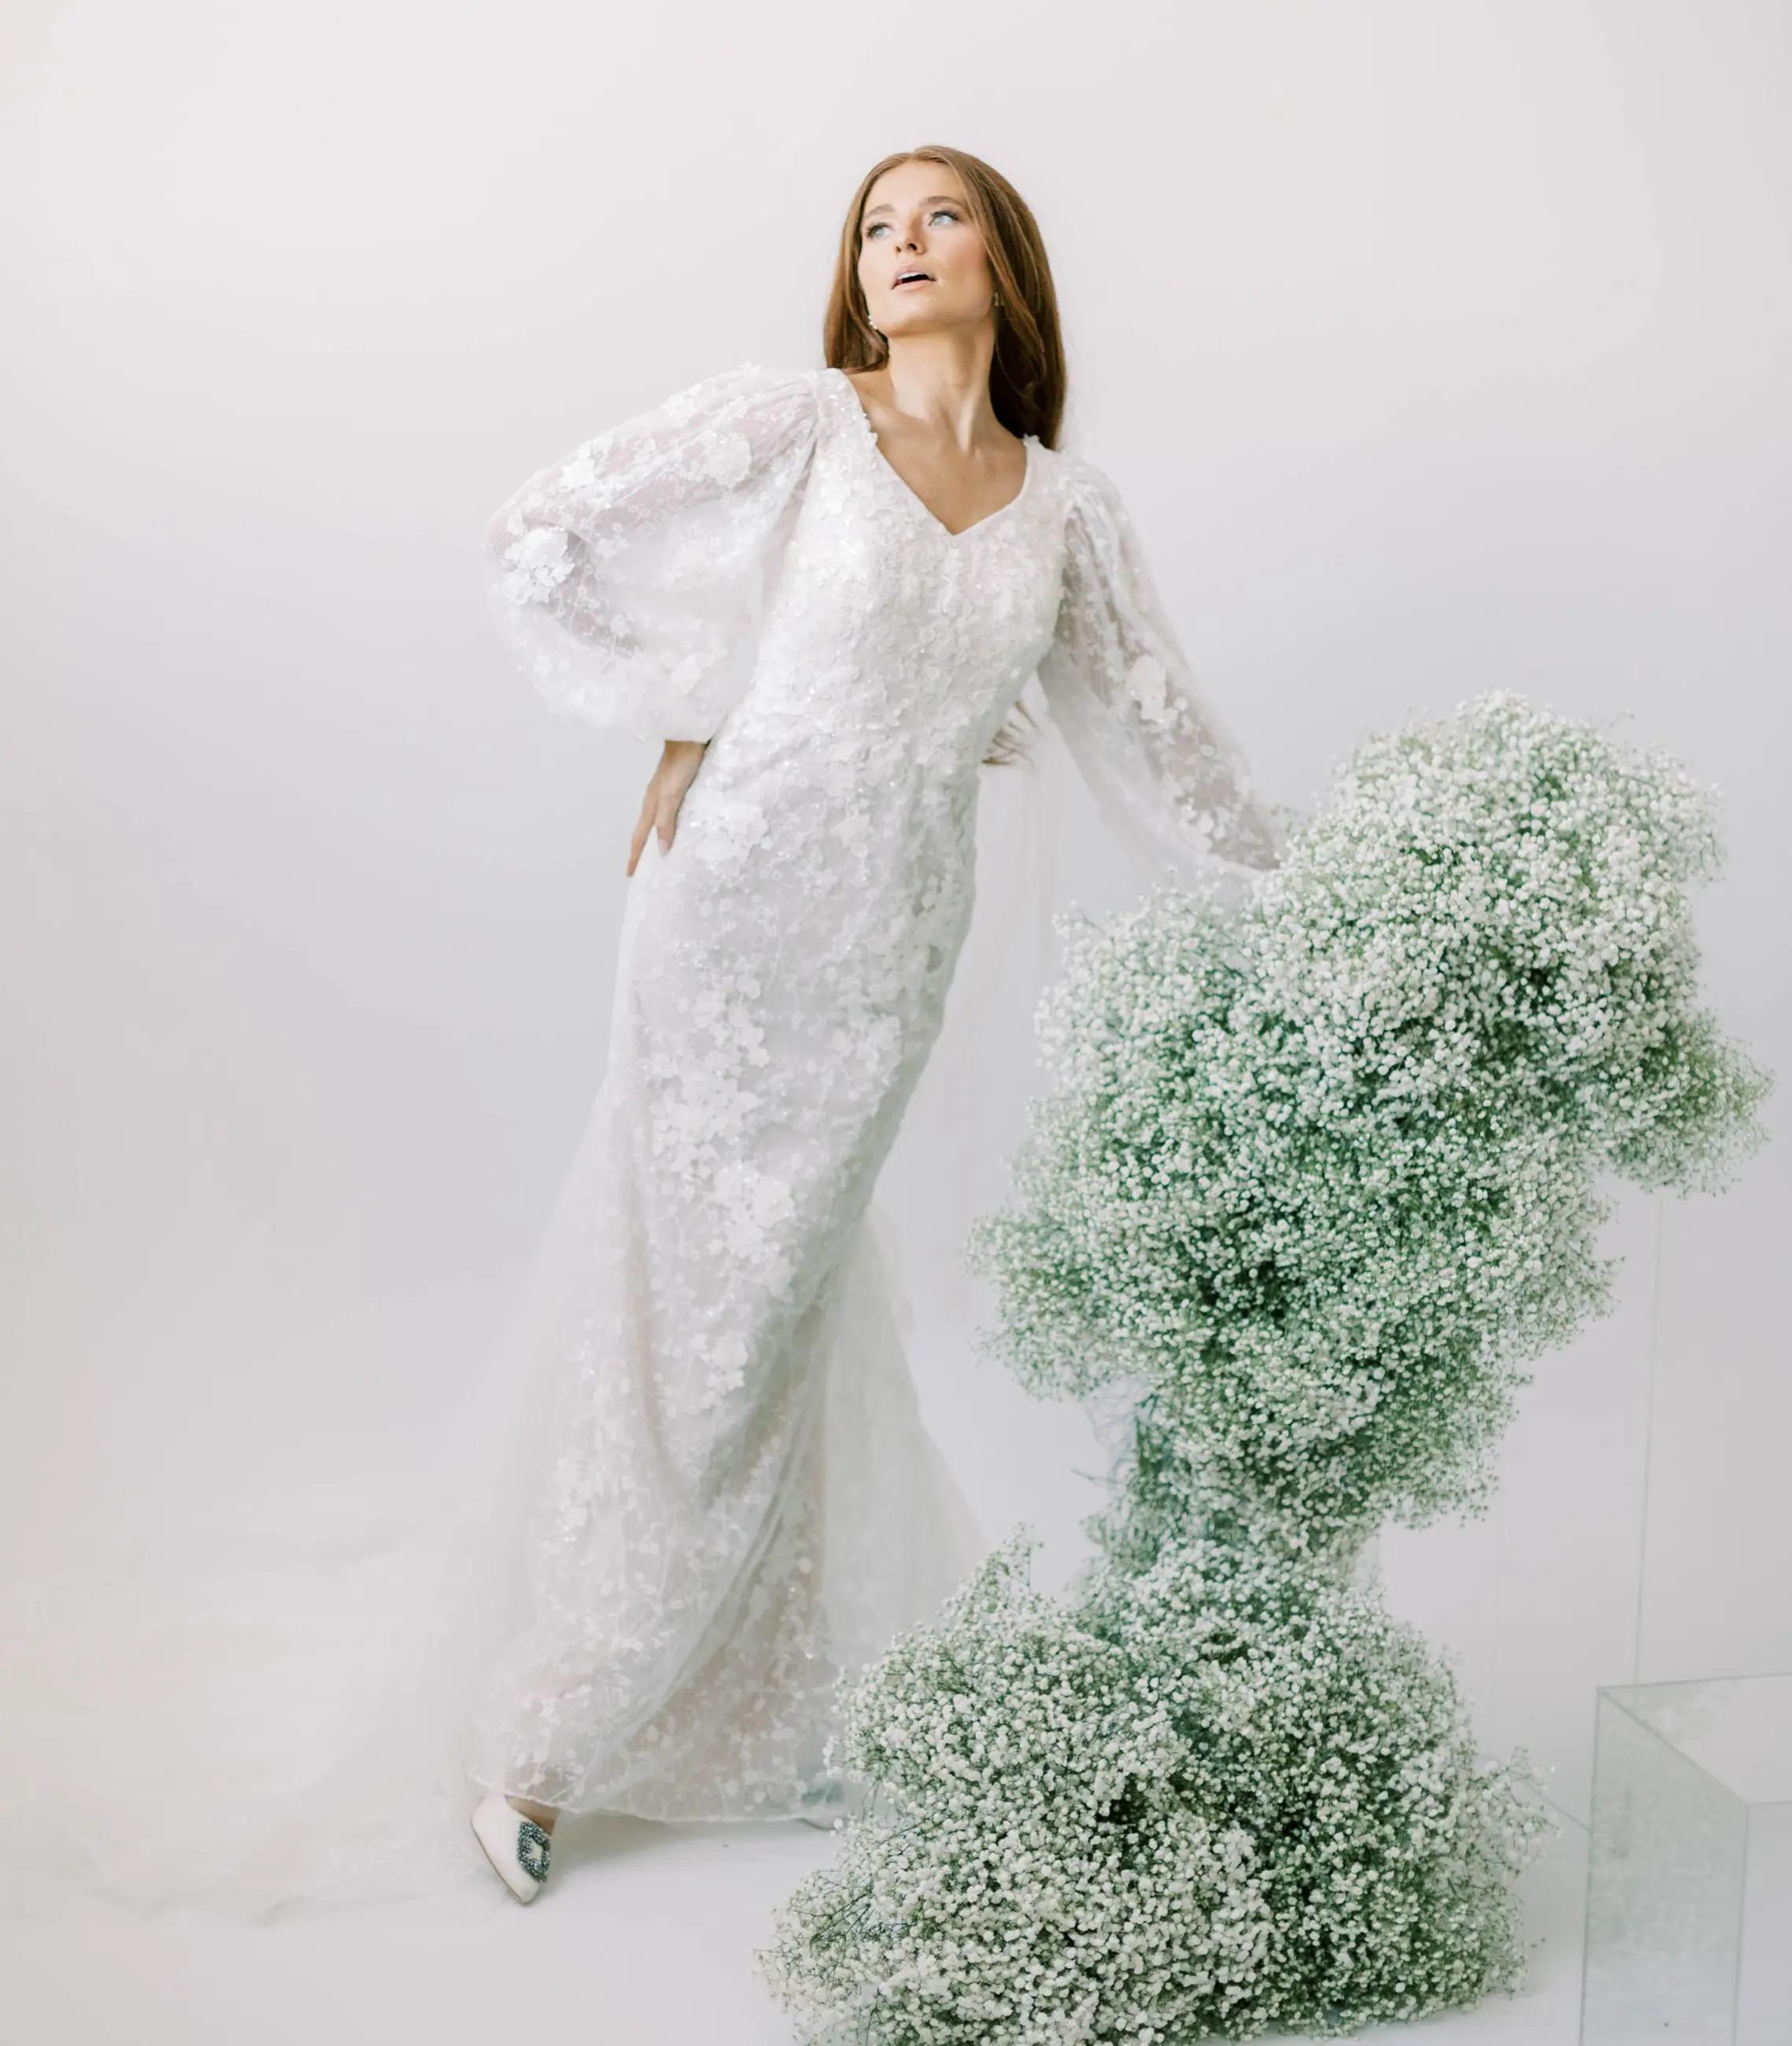 Model wearing a white bridal gown near the flowers